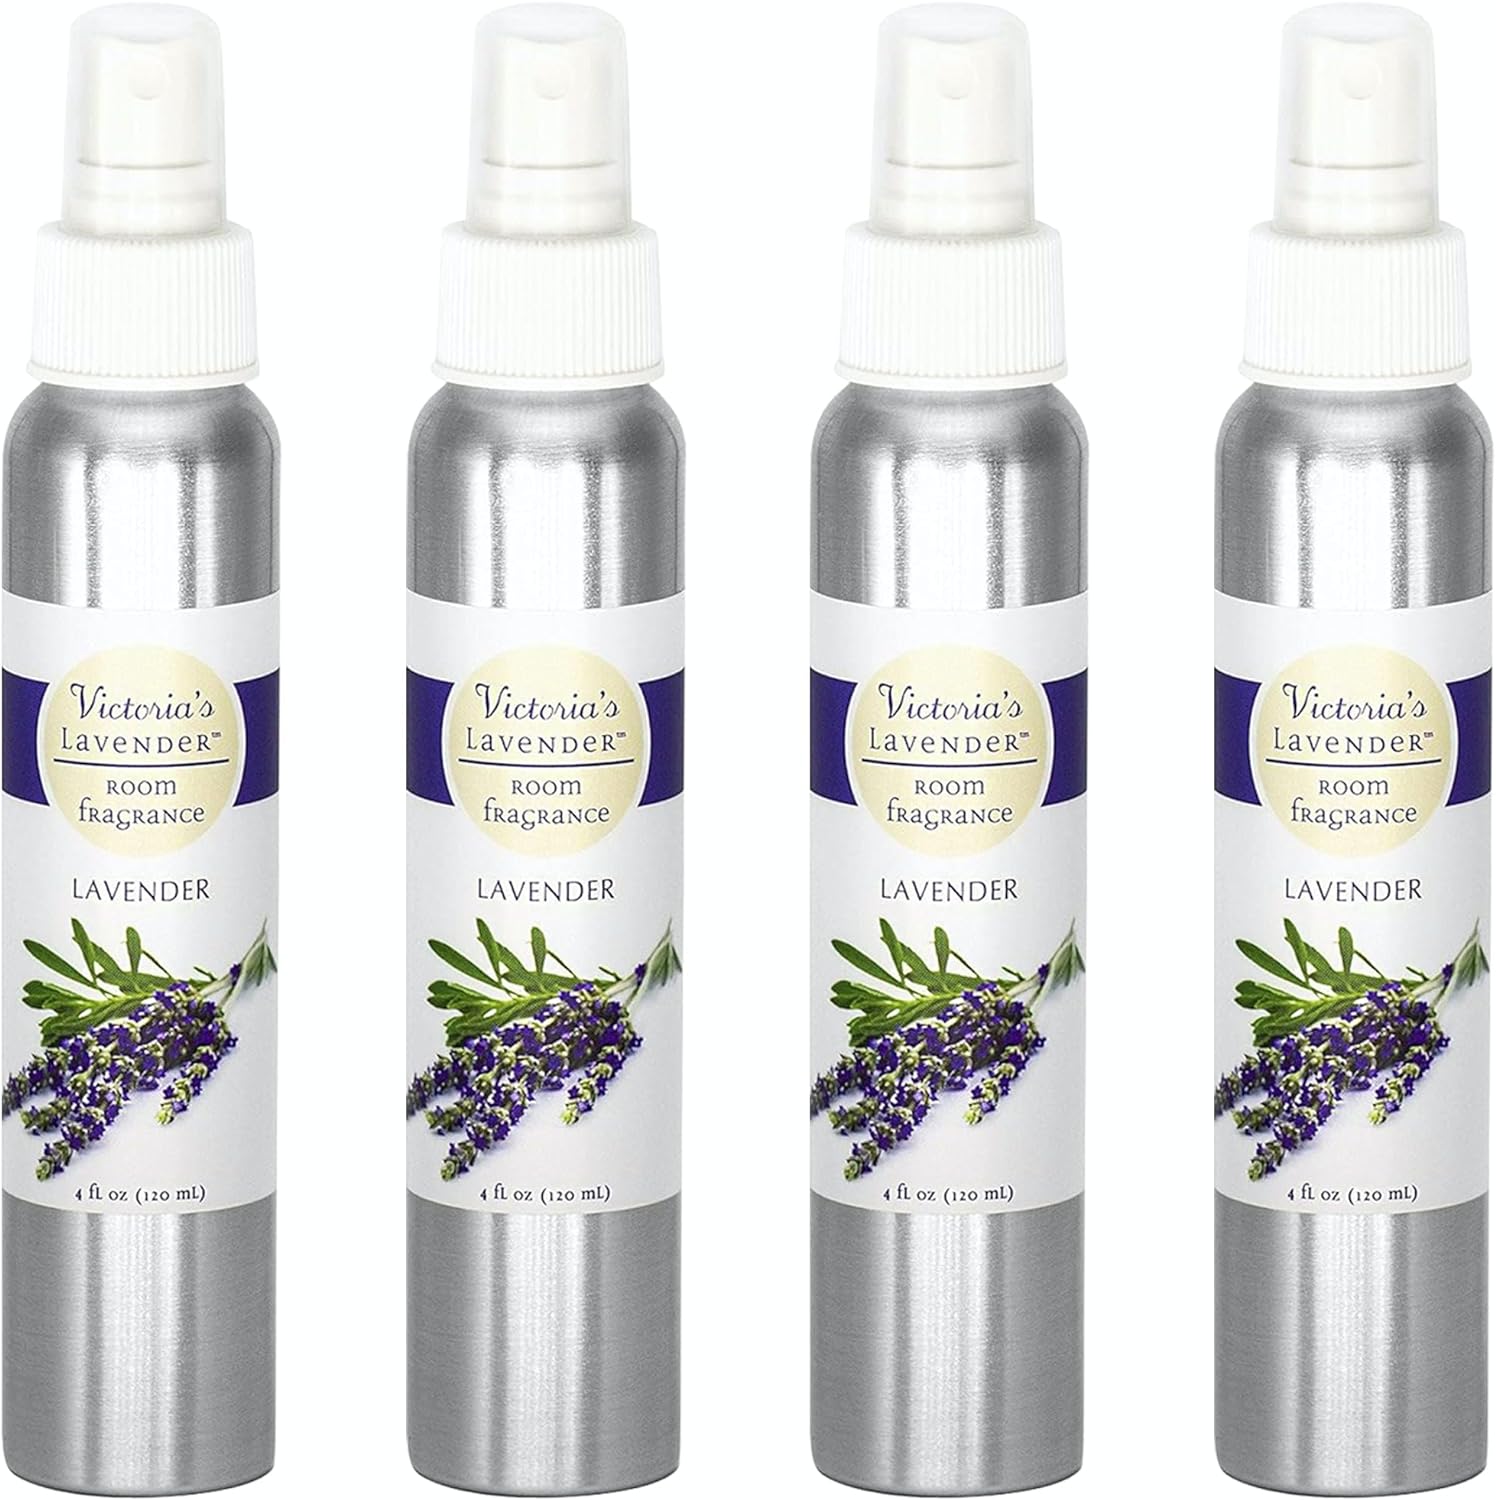 Victoria's Lavender Room Spray - All-Natural Home Fragrance, Pure Essential Oil Air Freshener & Odor Eliminator, Soothing and Refreshing Scent, Aromatherapy Household Essentials, 4-Pk Lavender, 4 oz